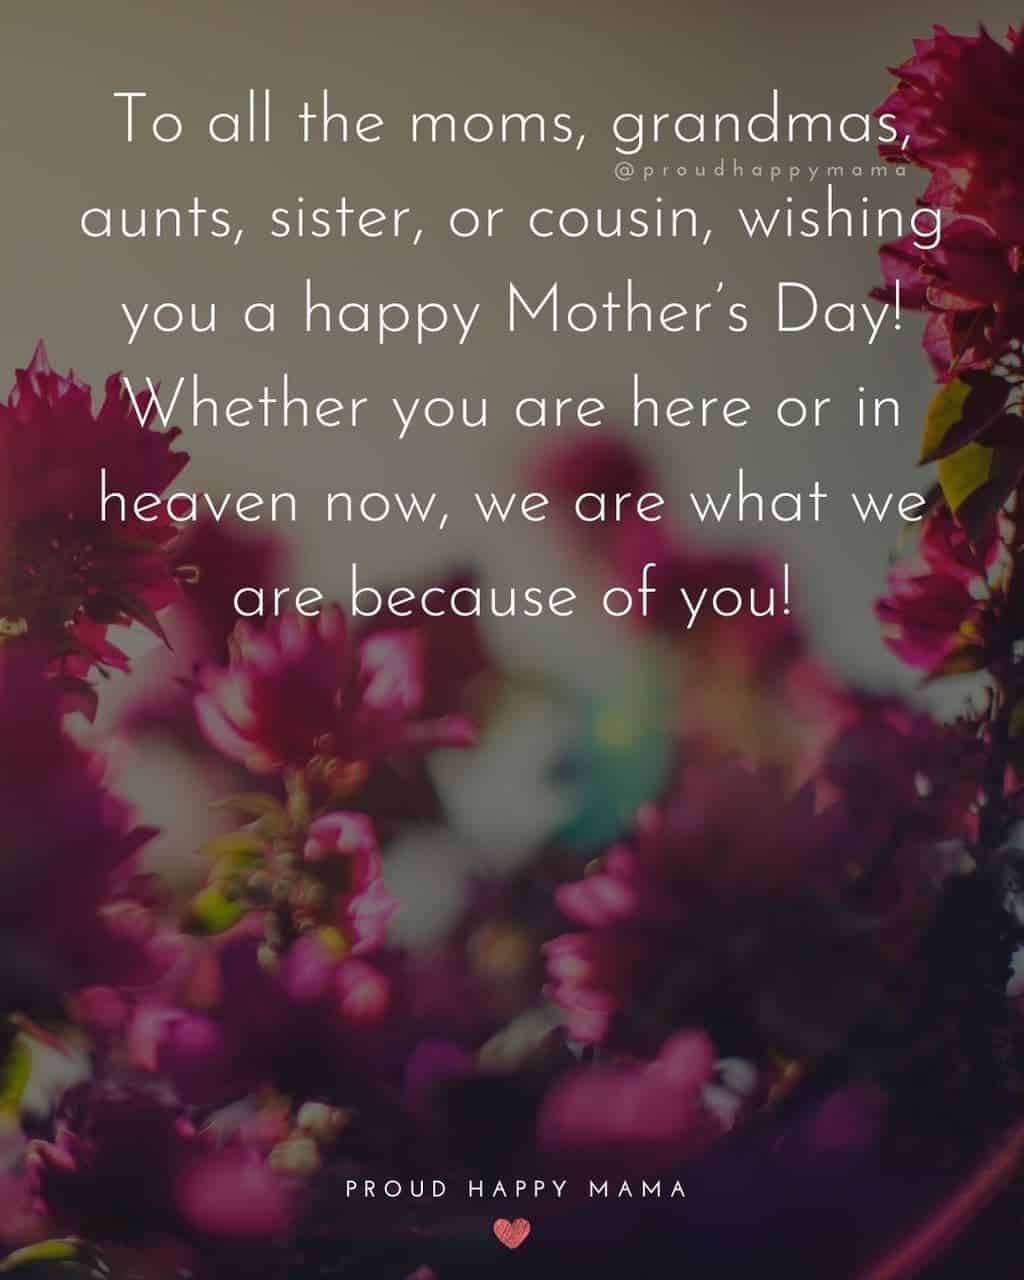 Happy Mothers Day Aunt - To all the moms, grandmas, aunts, sister, or cousin, wishing you a happy Mothers Day! Whether you are here or in heaven now, we are what we are because of you!